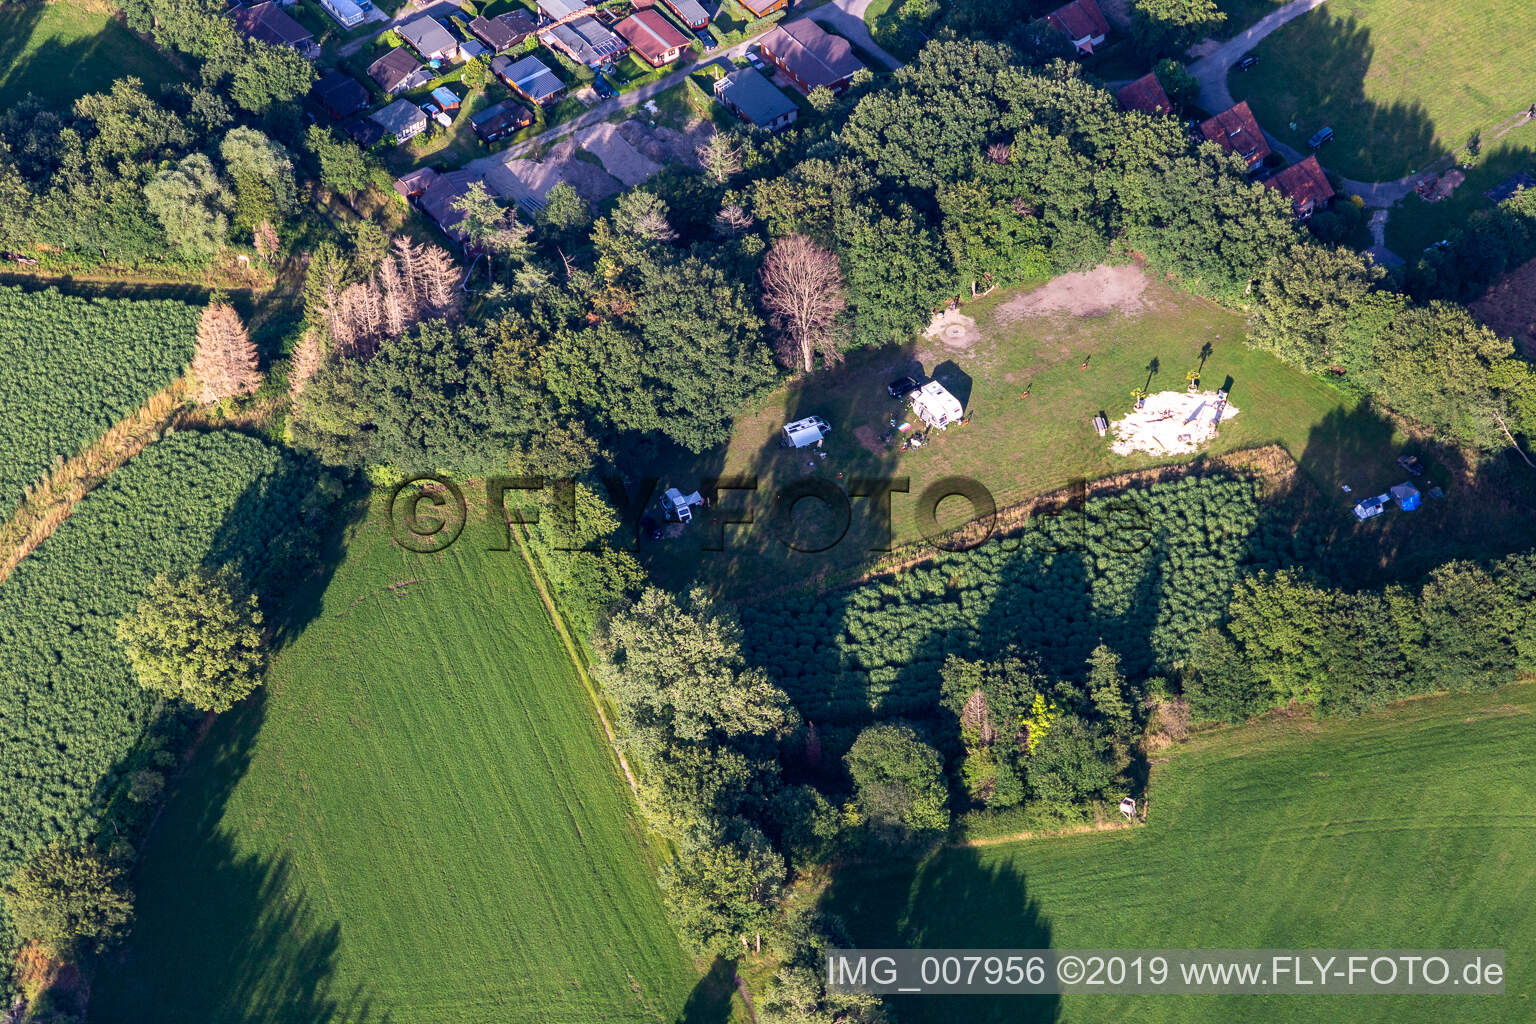 Waldvelen recreation area, family ven der Buss in Velen in the state North Rhine-Westphalia, Germany seen from above